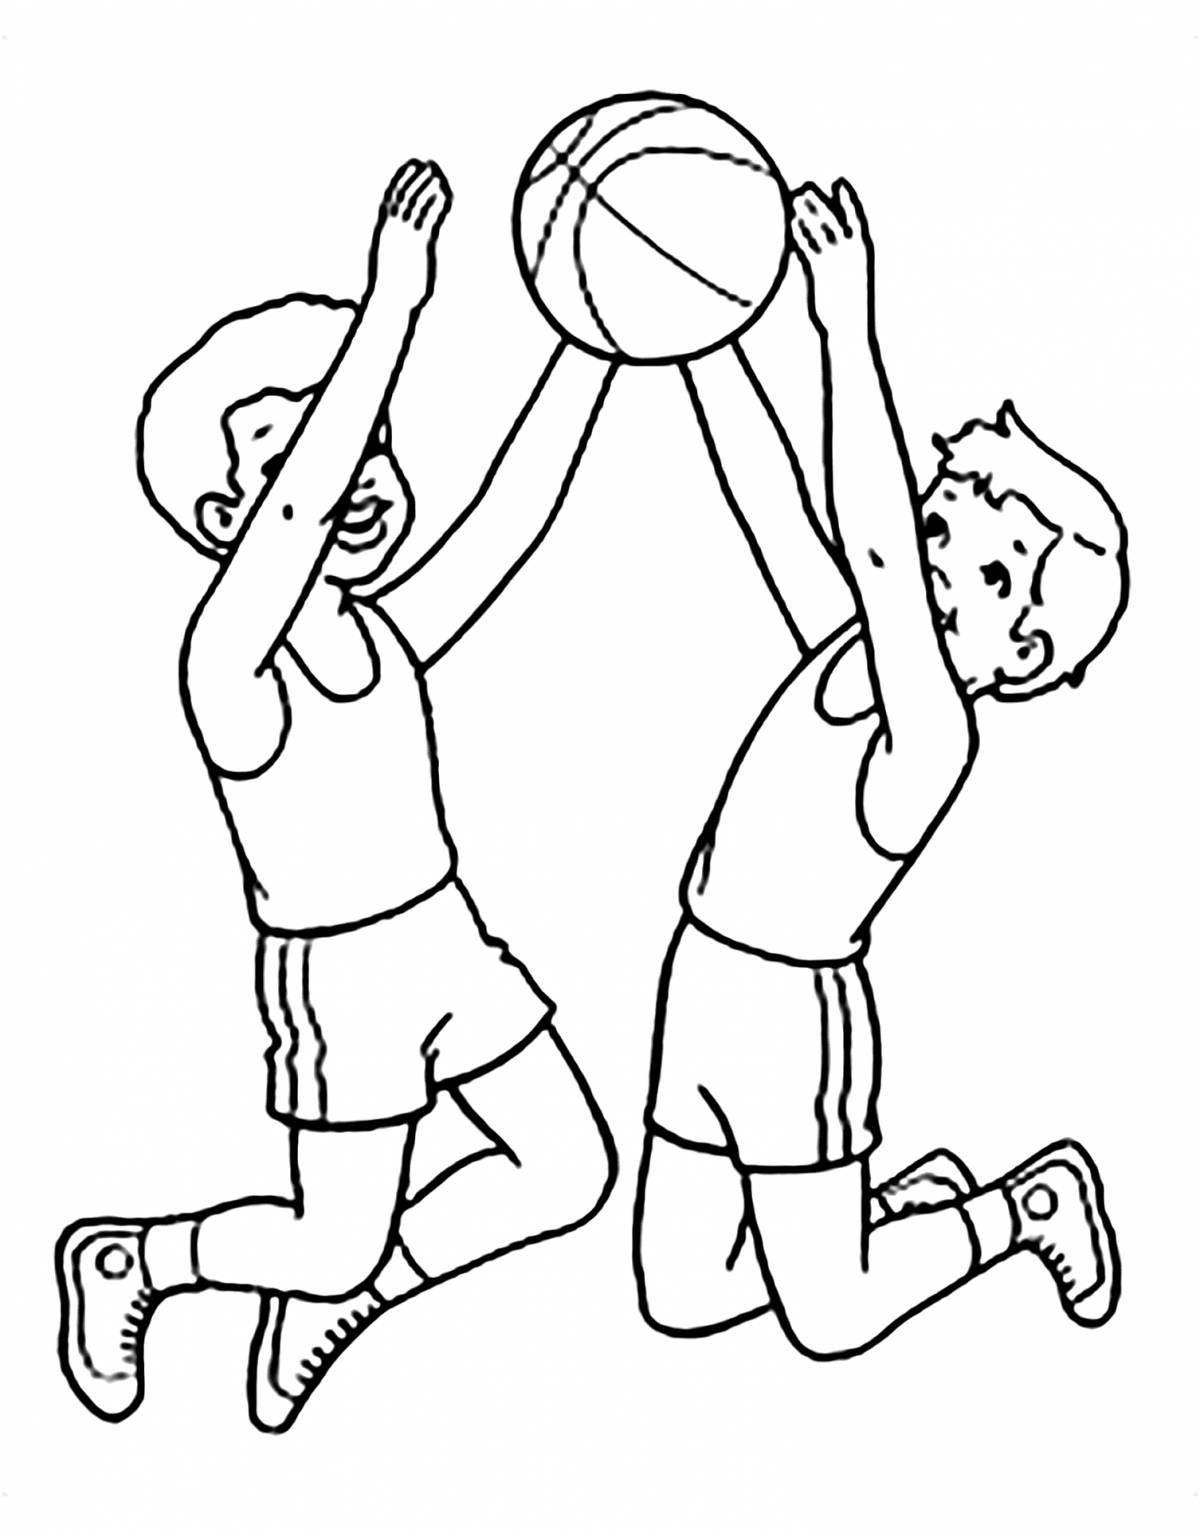 Volleyball coloring book for kids